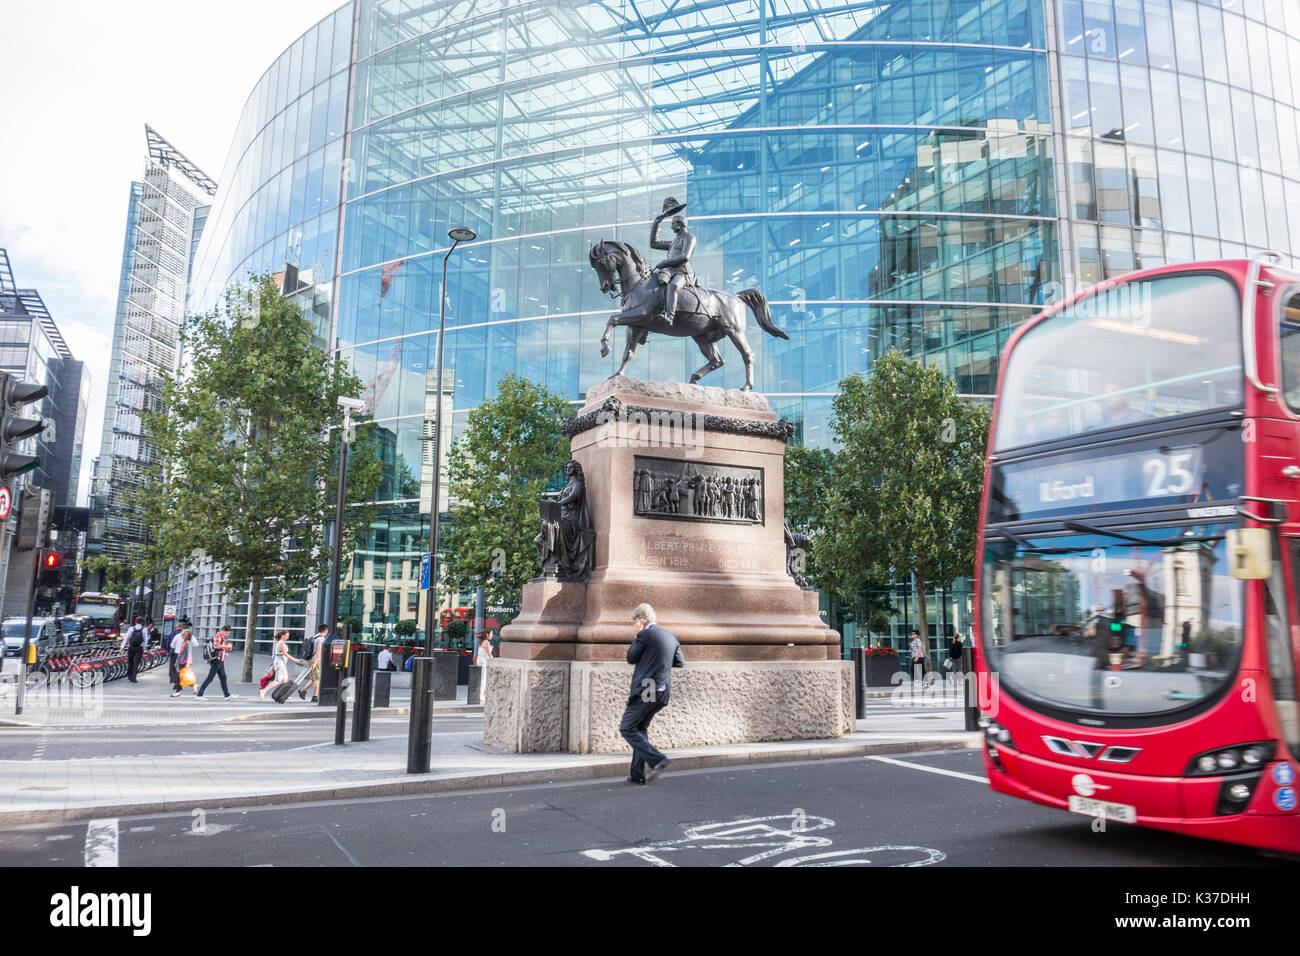 Prince Albert Equestrian Statue in front of 33 Holborn Sainsbury's head office. Holborn Circus, City of London, UK Stock Photo